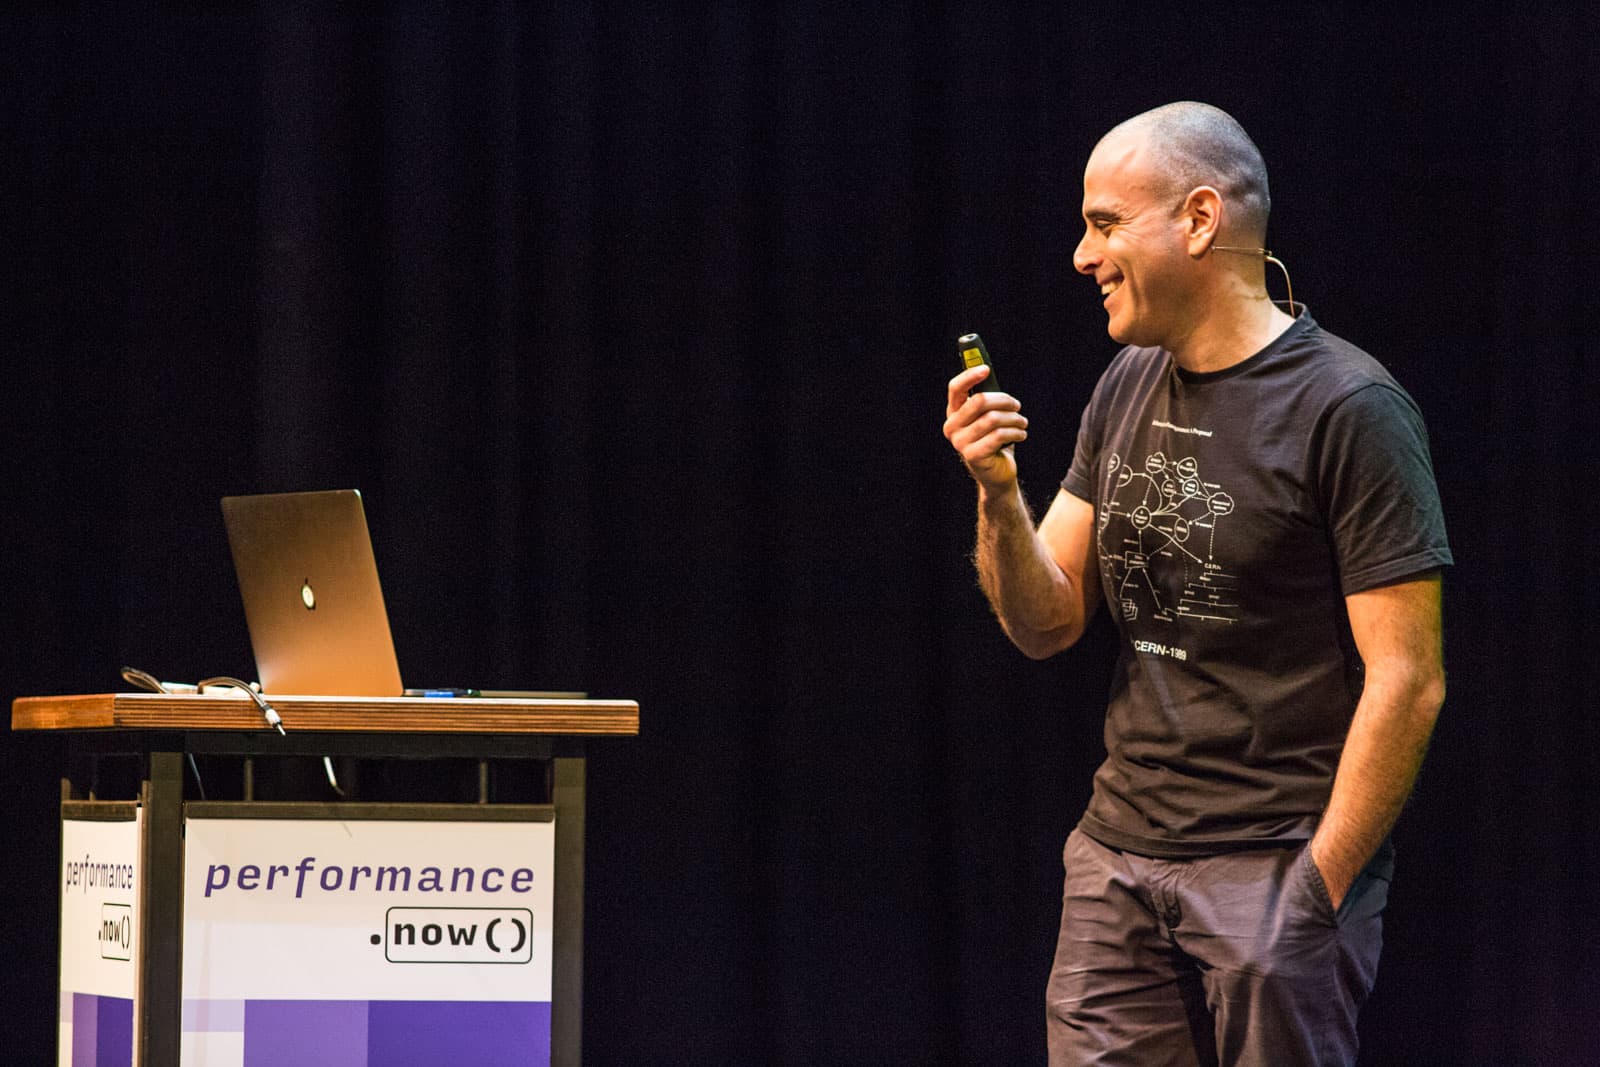 Me on stage at performance.now(). Holding a clicker and smiling, while seemingly transitioning slides.